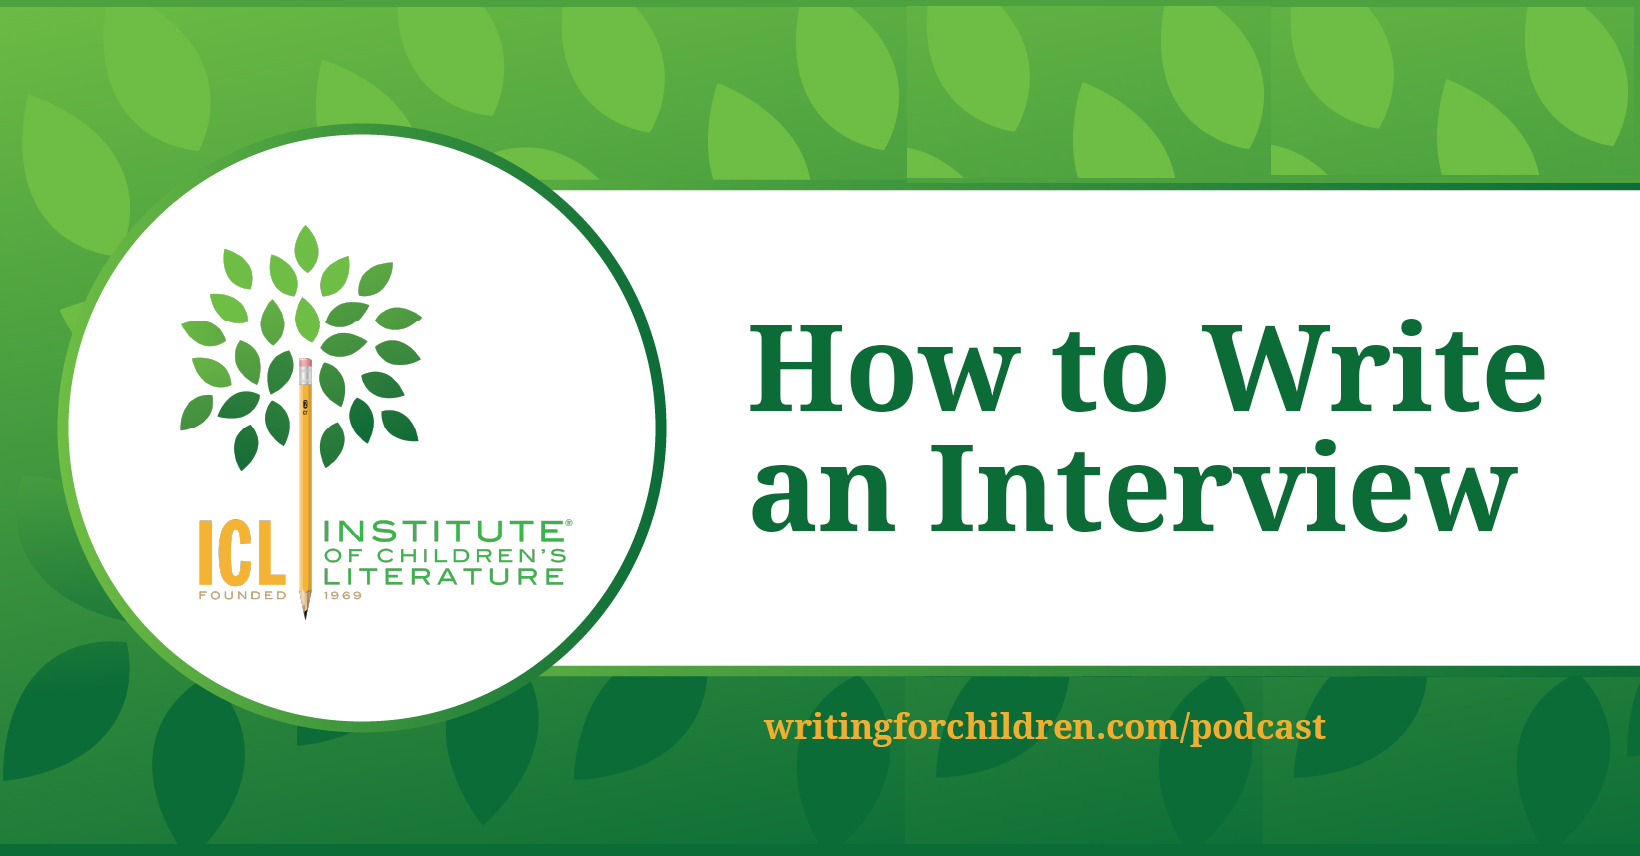 How-to-Write-an-Interview-episode-106